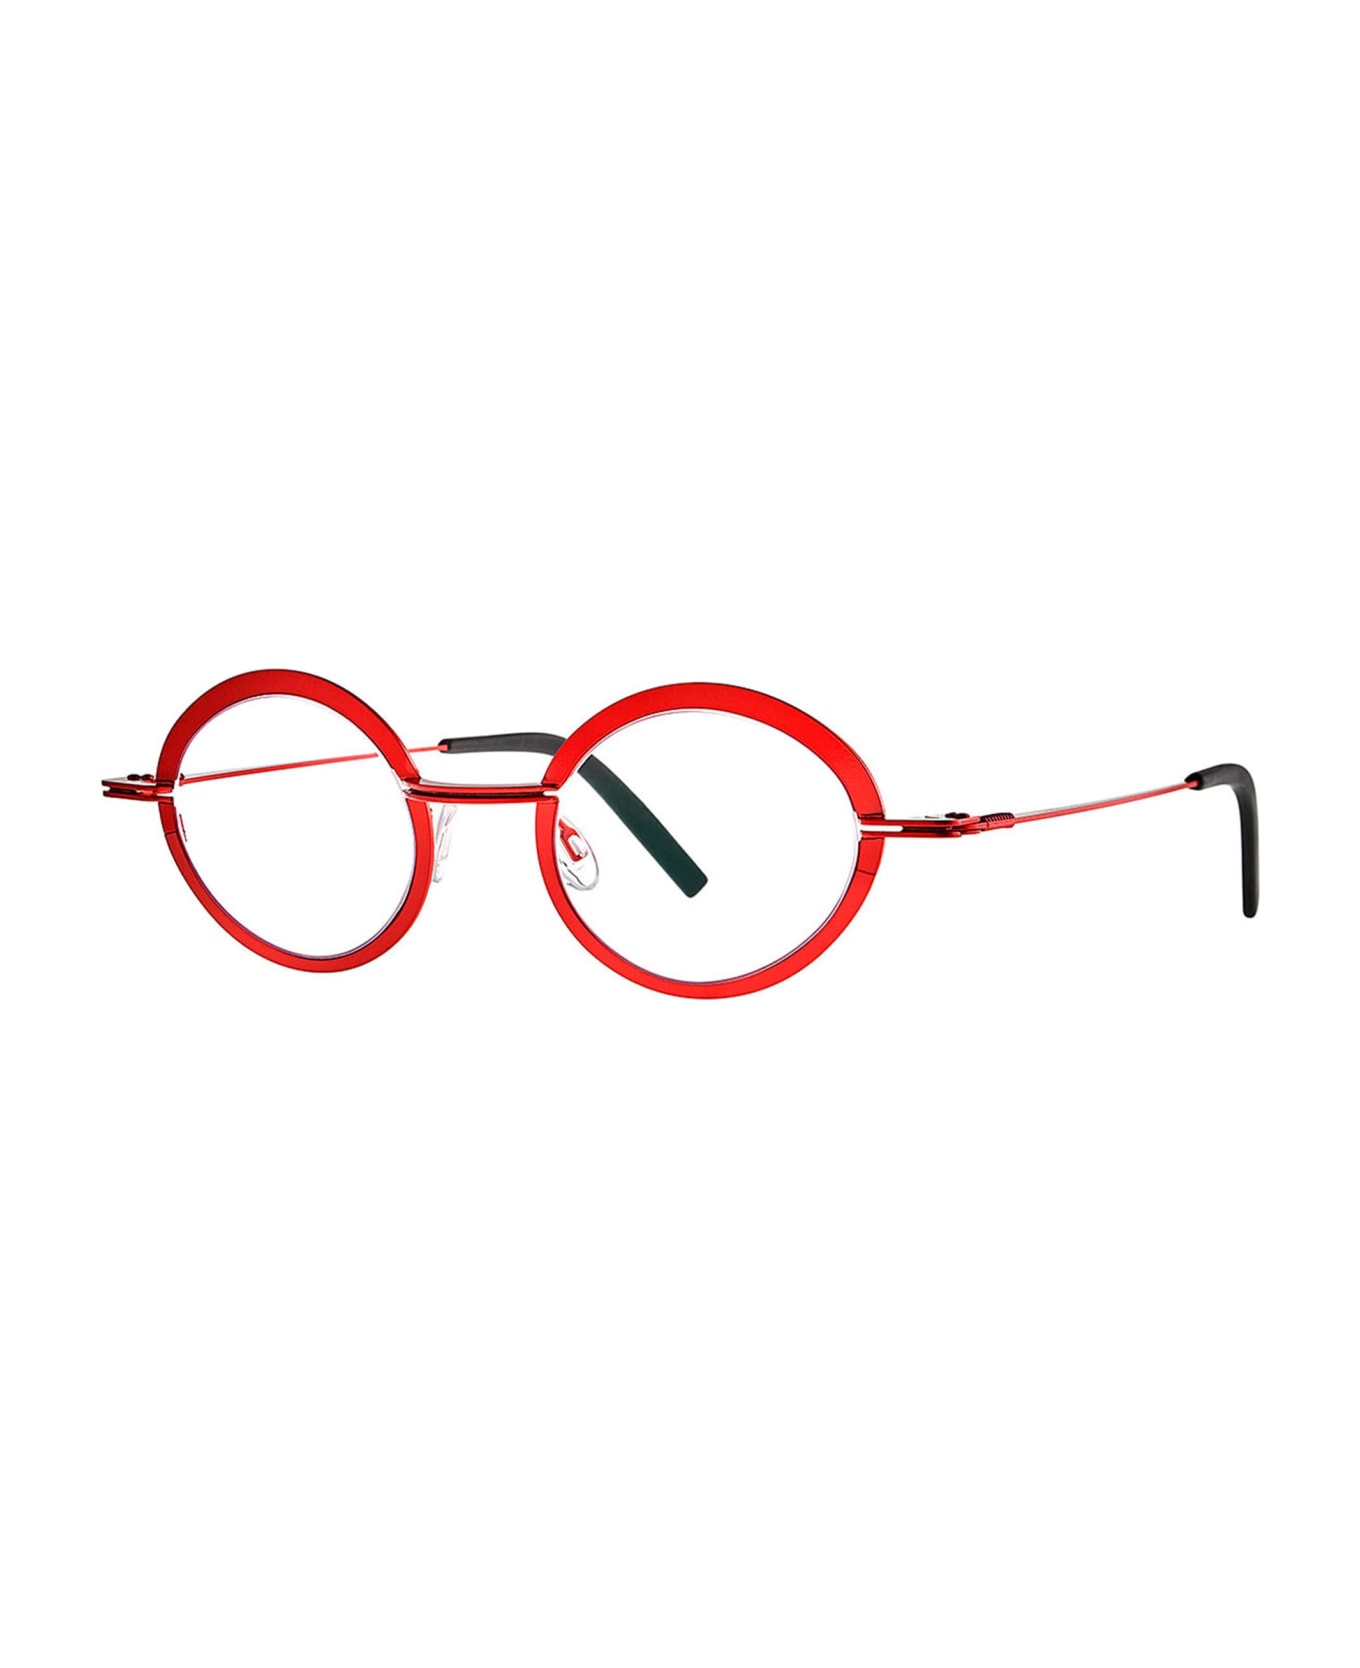 Theo Eyewear Grilled - 036 Rx Glasses - red